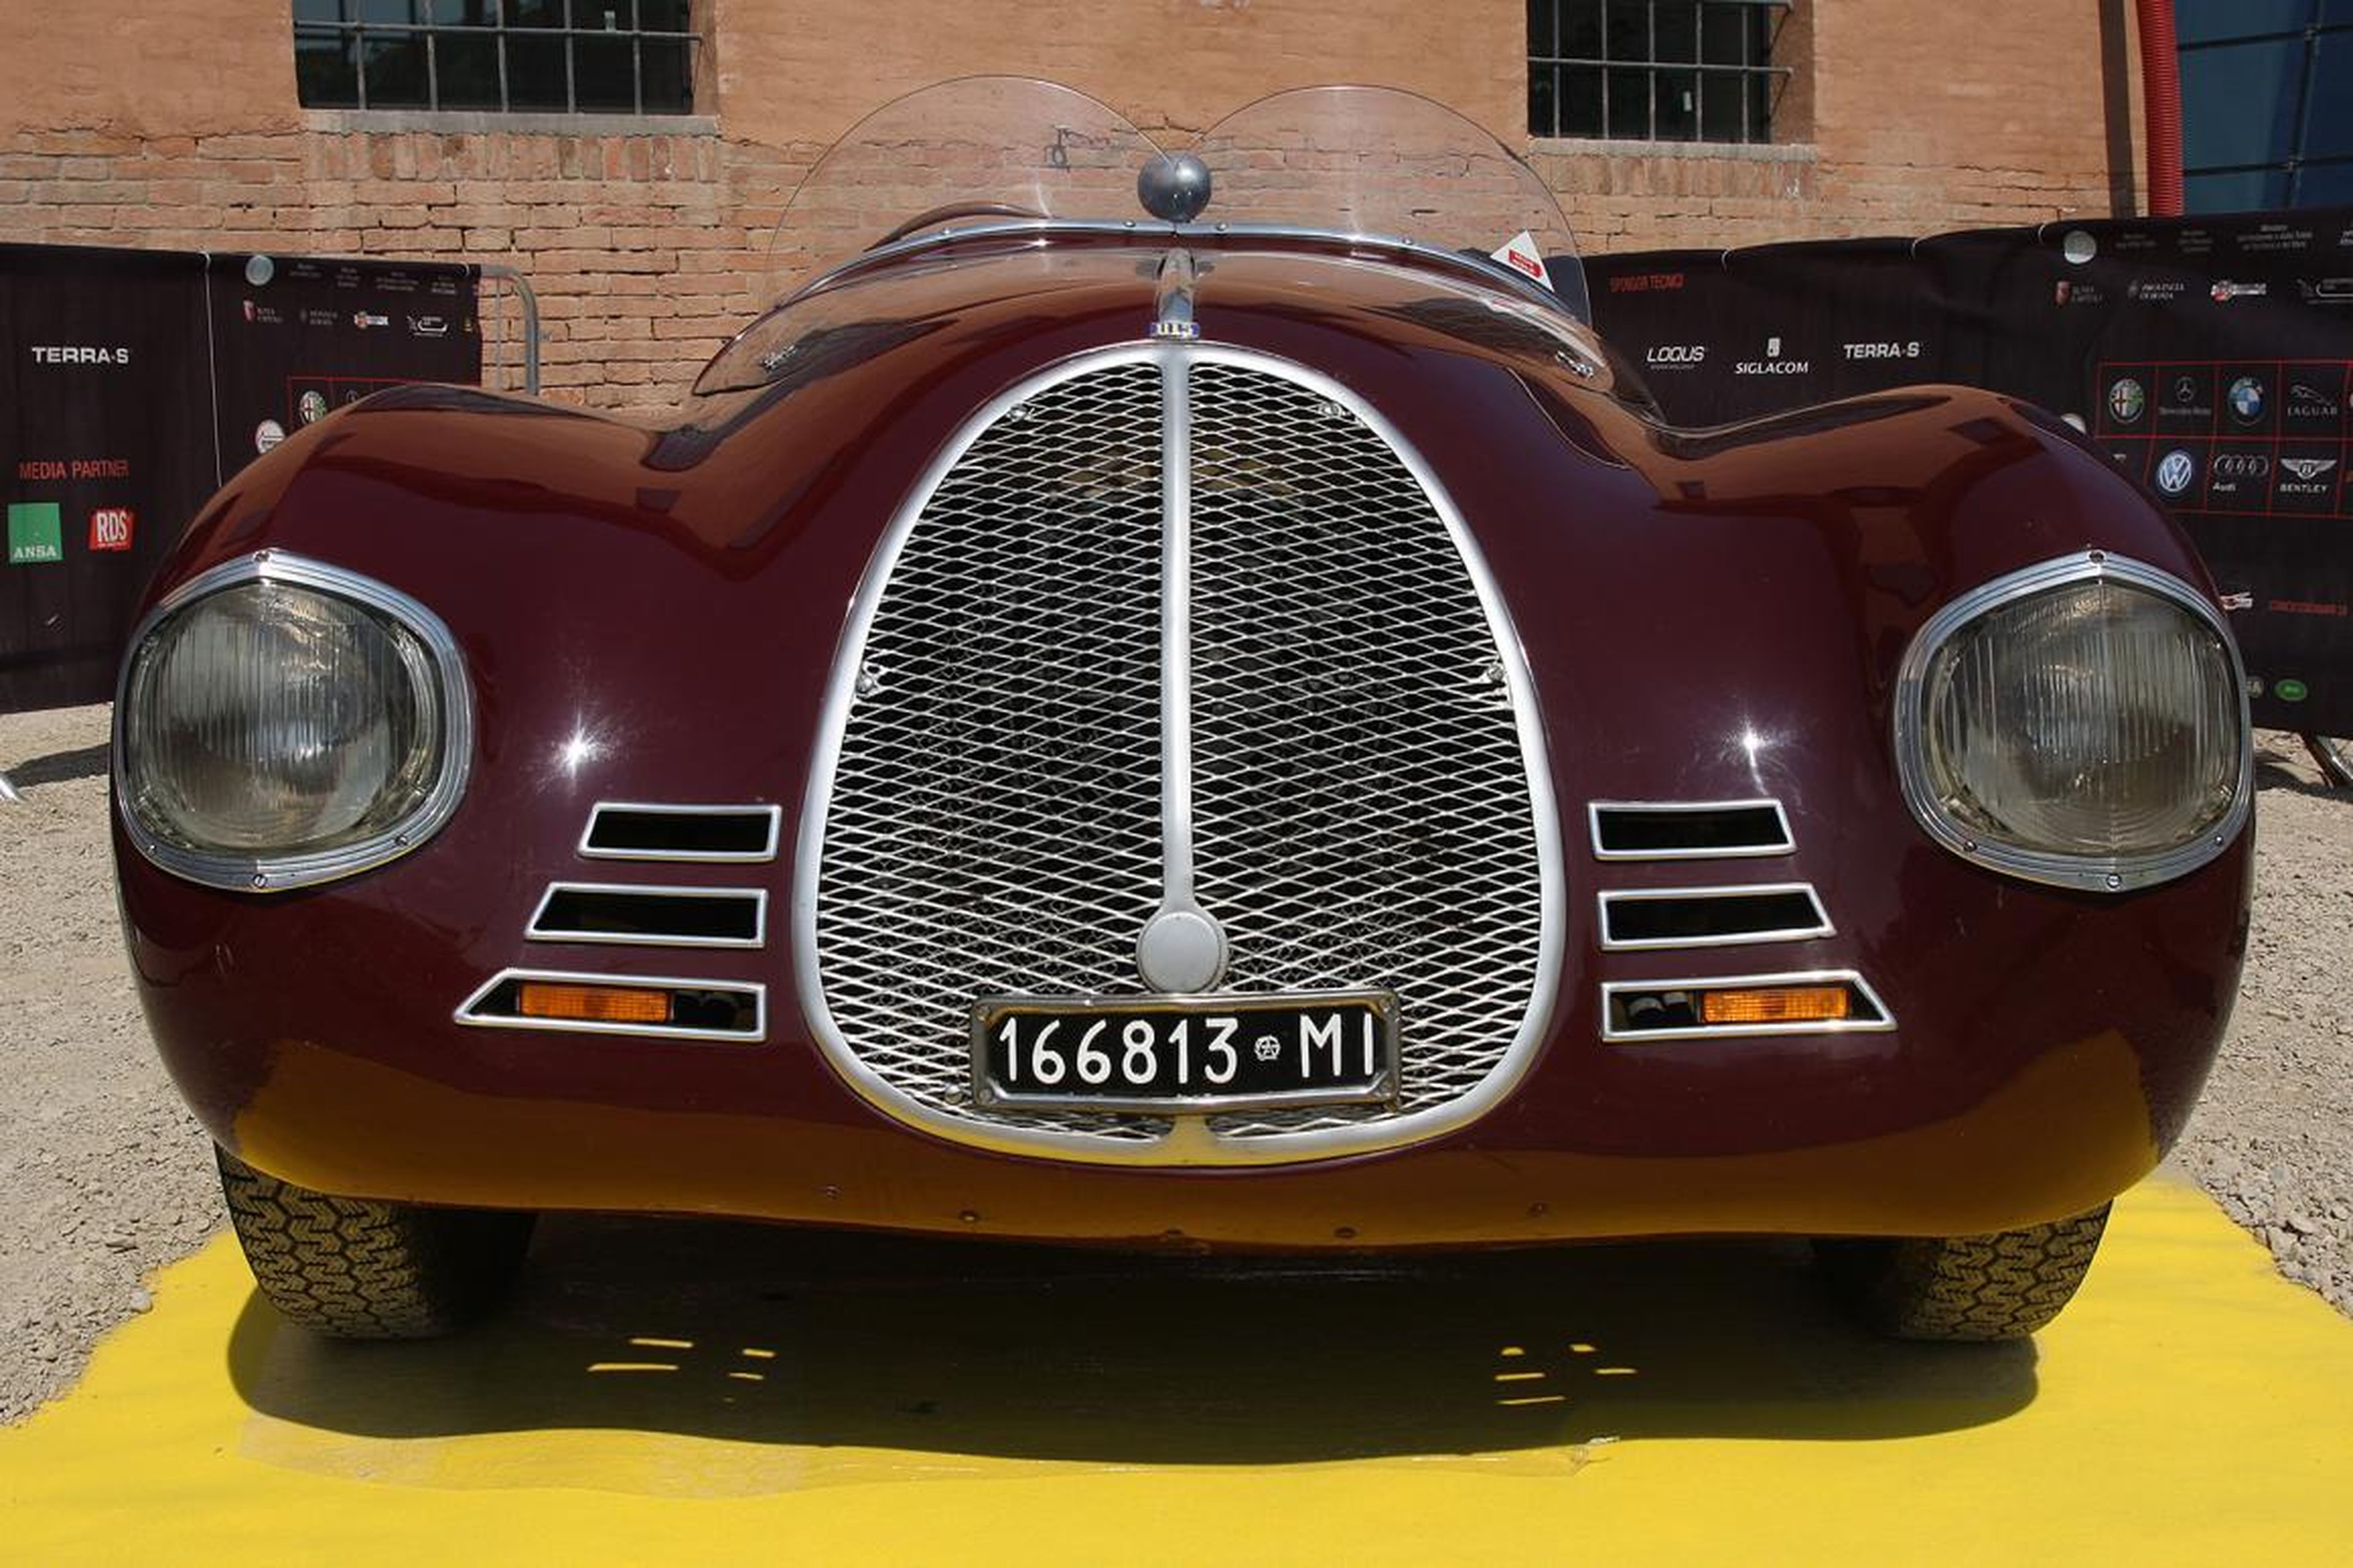 AAC built two 815 cars in 1940. Both were prohibited from carrying the Ferrari name due to a noncompete agreement between Enzo and his previous employers. The agreement prohibited Ferrari from using his name in relation to races